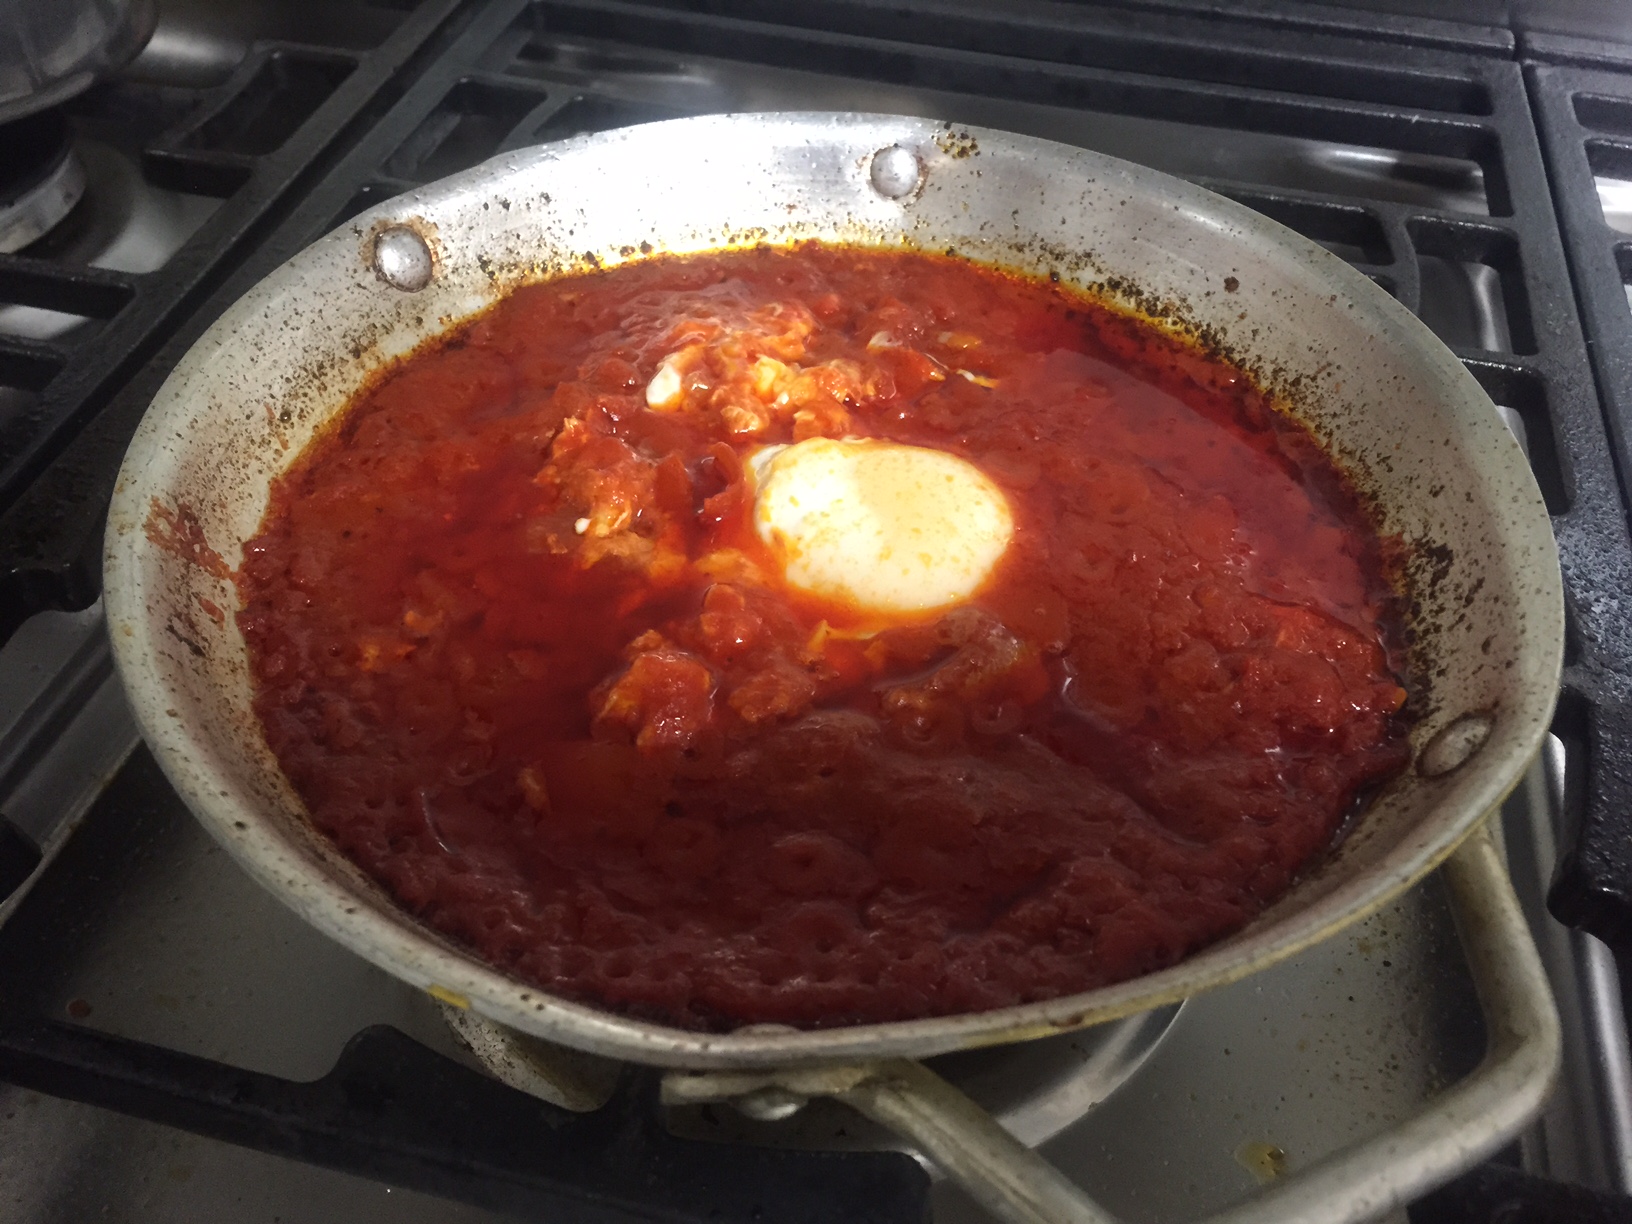 Always start with some good food: my own authentic Shakshuka